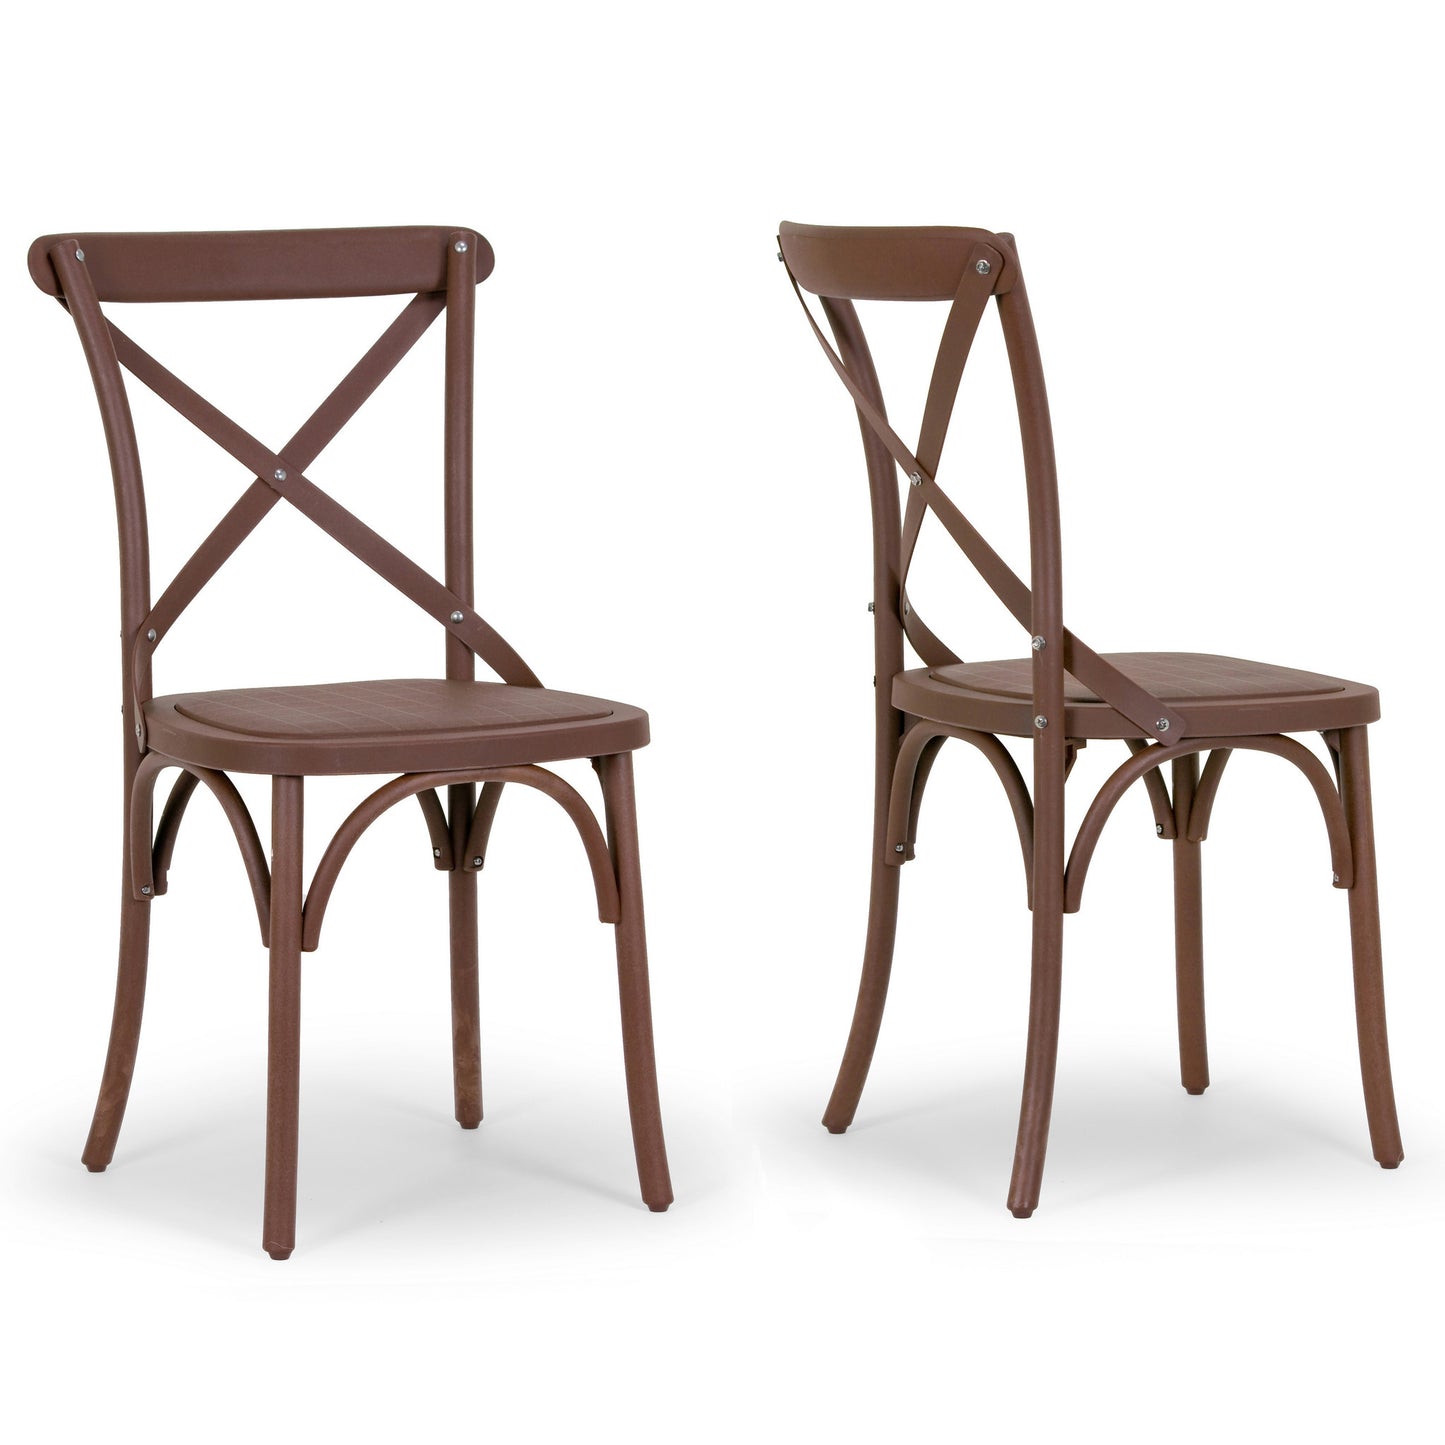 Set of 2 Aleah Outdoor Indoor Dining Chair Cross Back Chairs in Brown